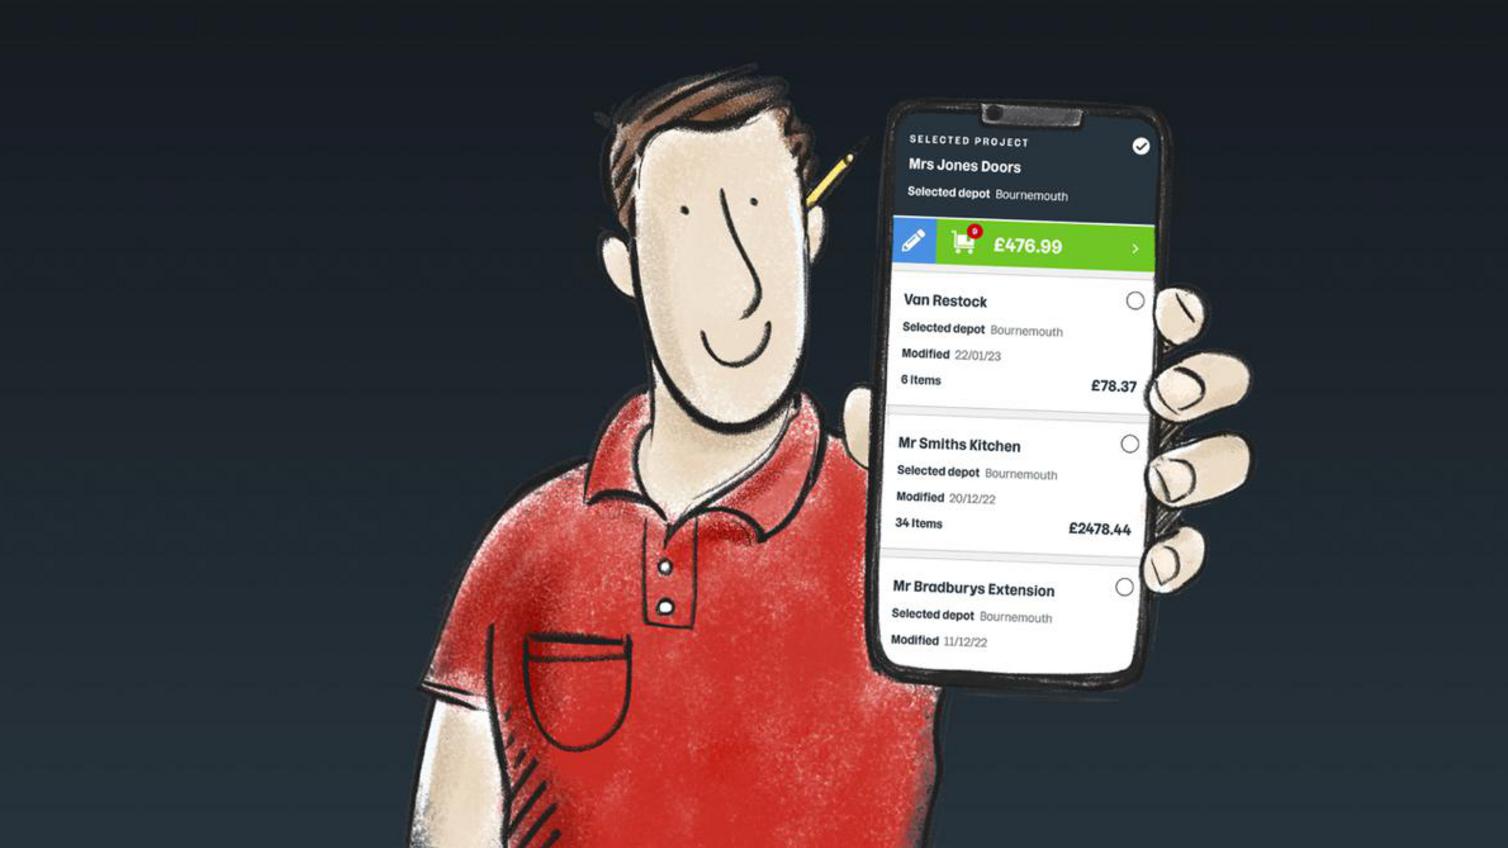 An icon showing a man holding a mobile phone which is displaying the multi list functionality